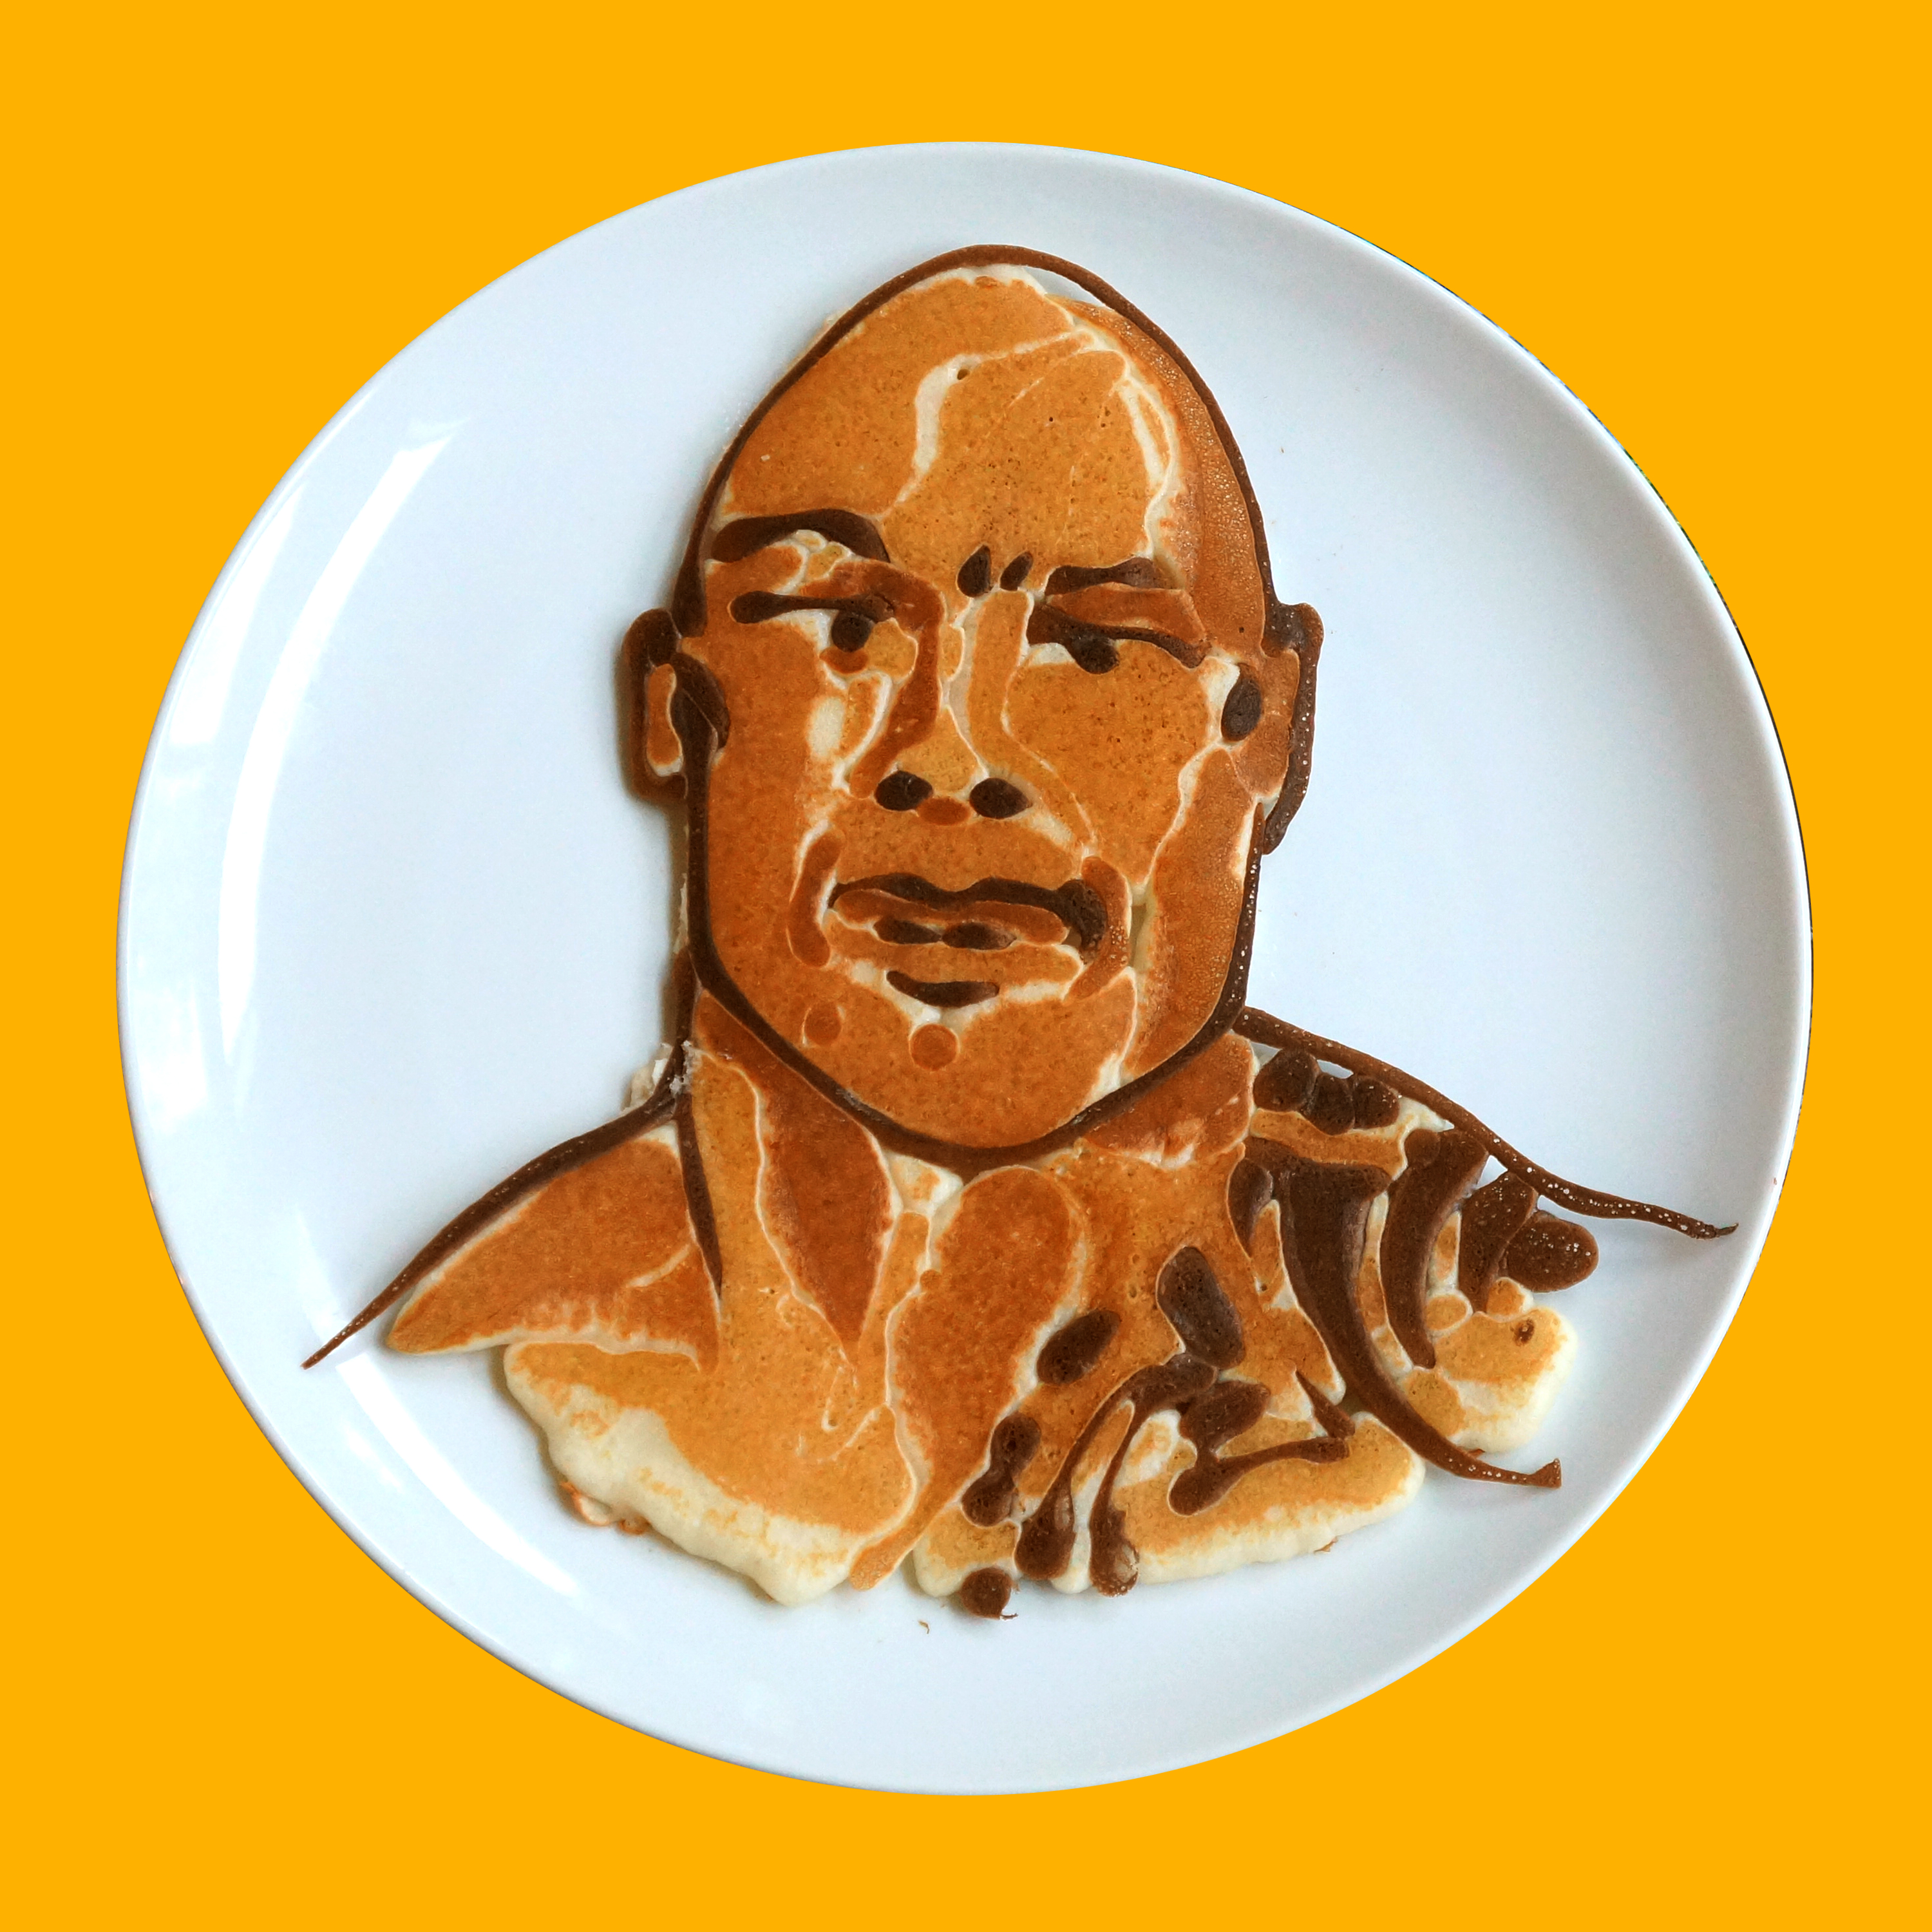 Nathan Shields creates pancake portraits of famous faces for NOW TV, Dwayne Johnson from Baywatch